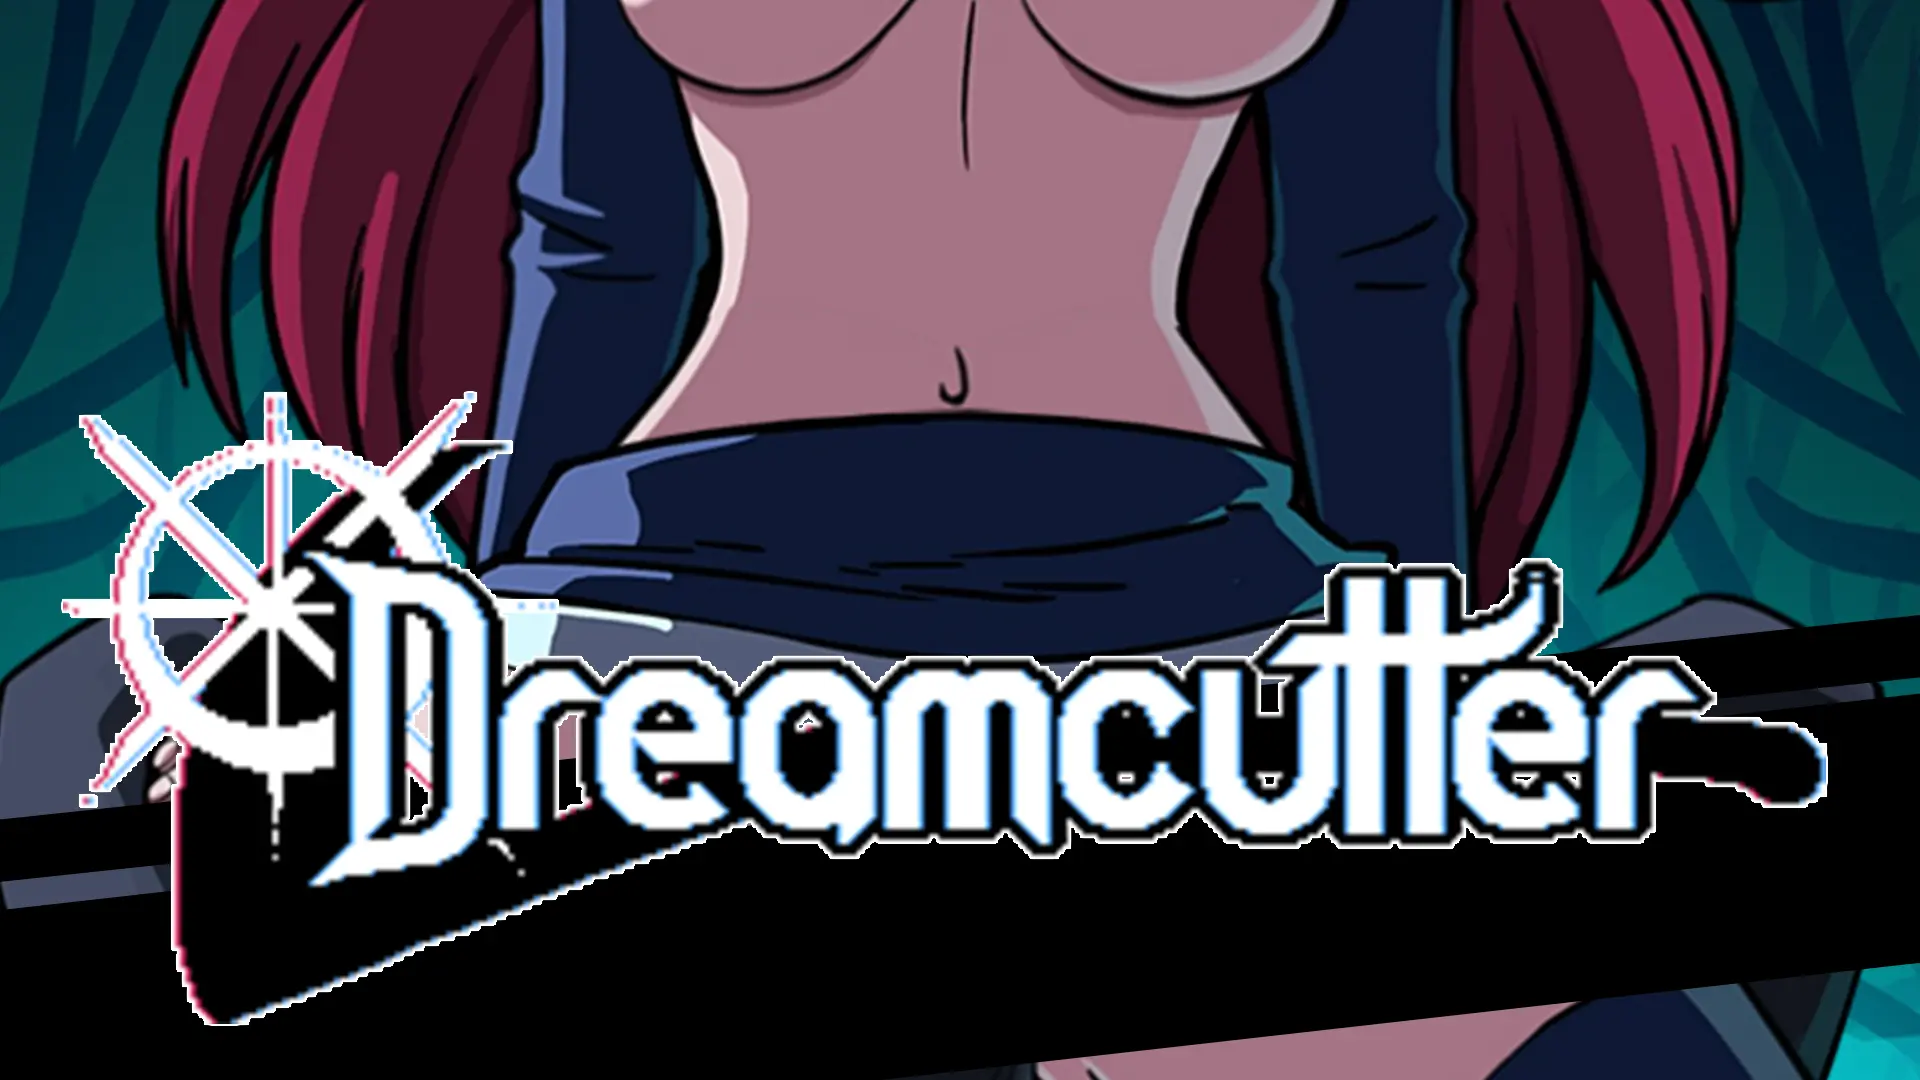 Dreamcutter main image